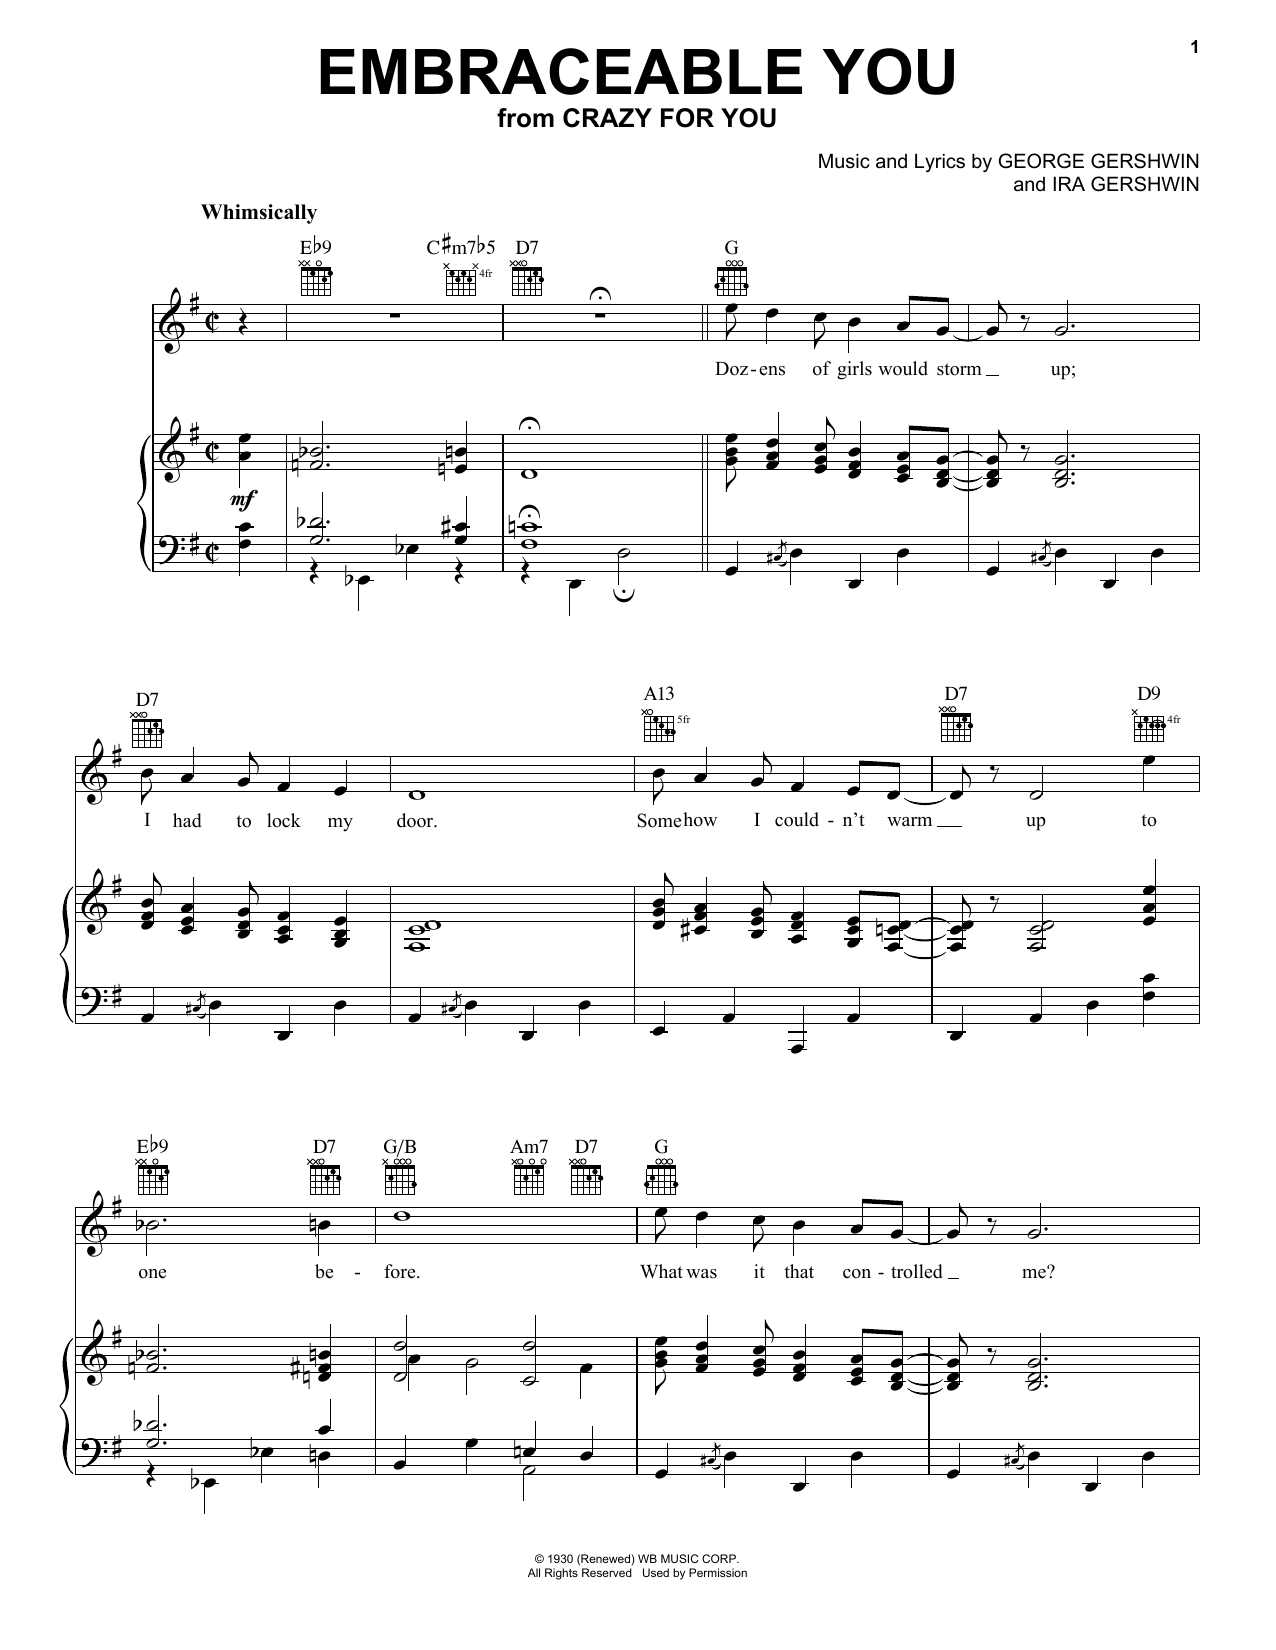 Download Frank Sinatra Embraceable You Sheet Music